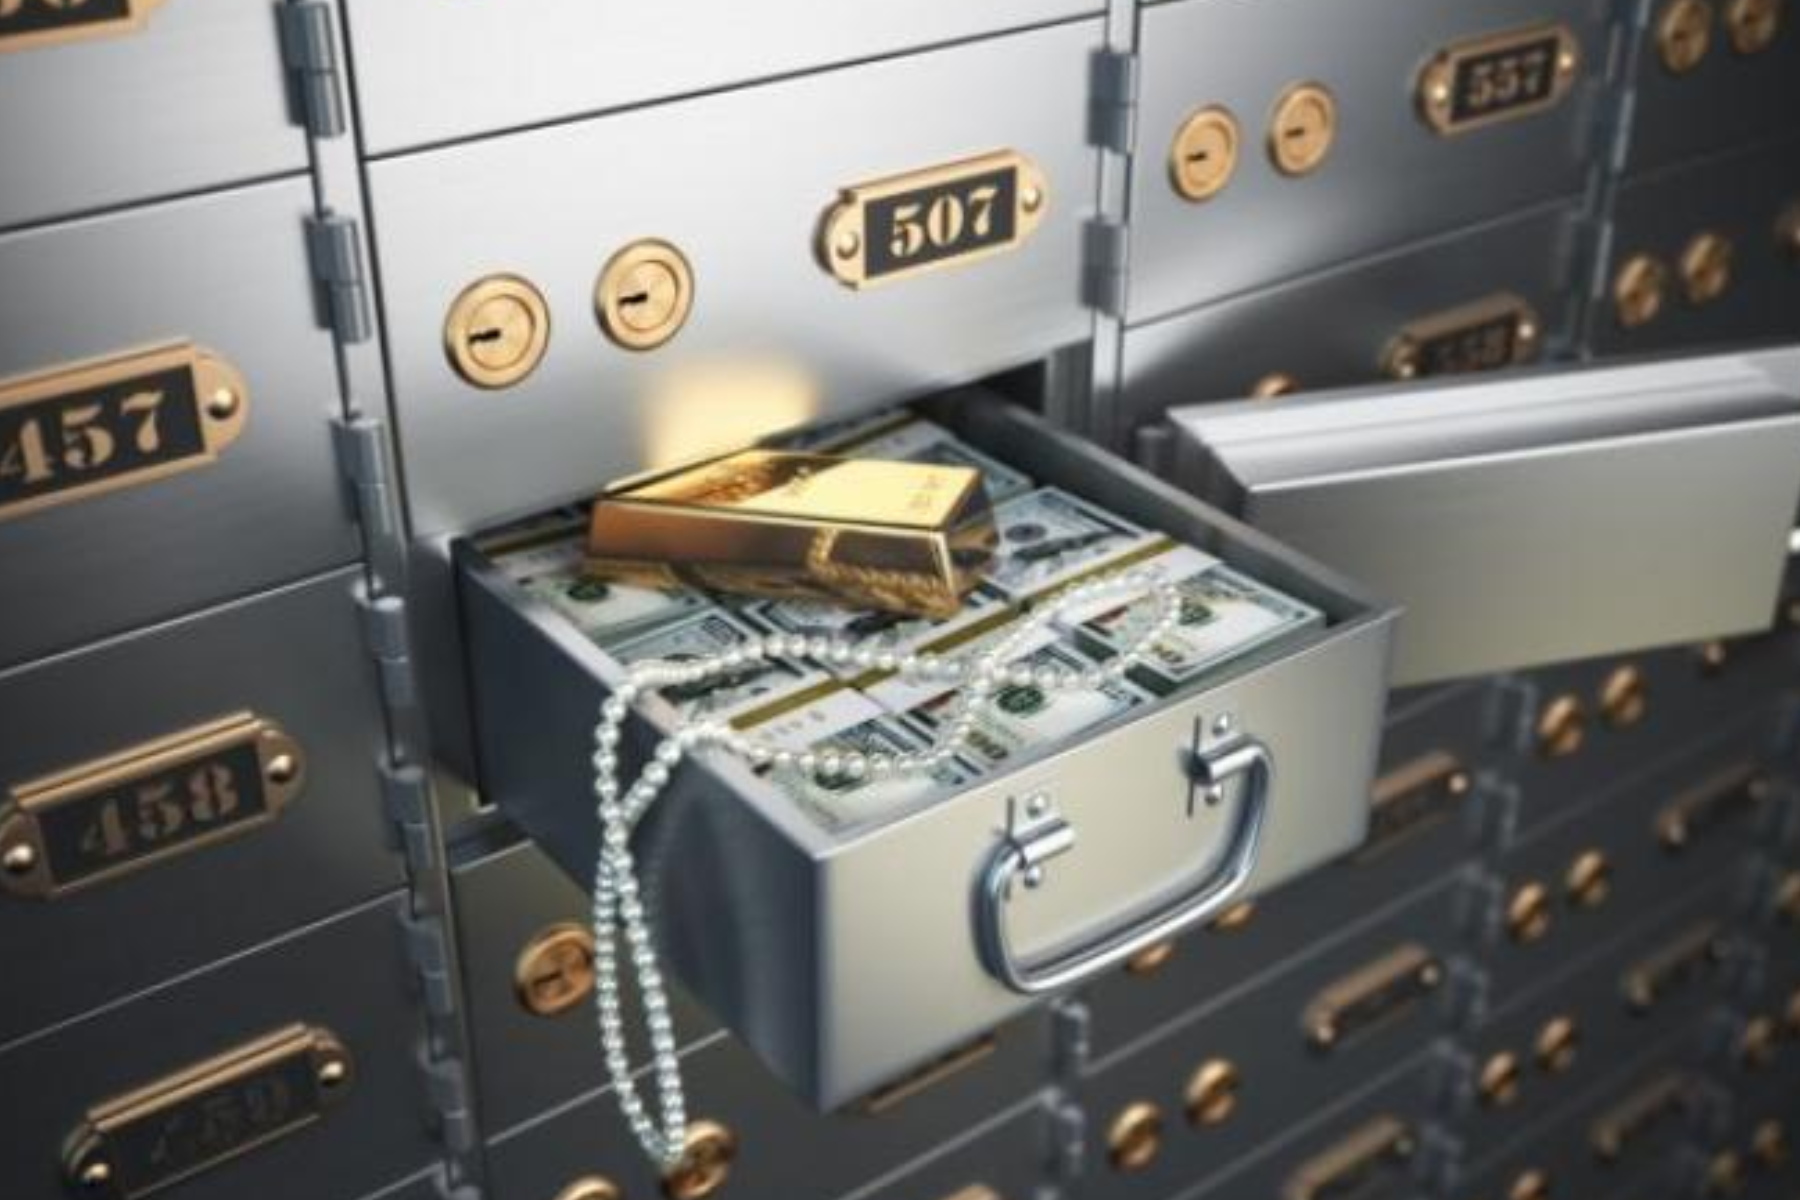 A deposit box containing cash, a pearl necklace, and a gold bar